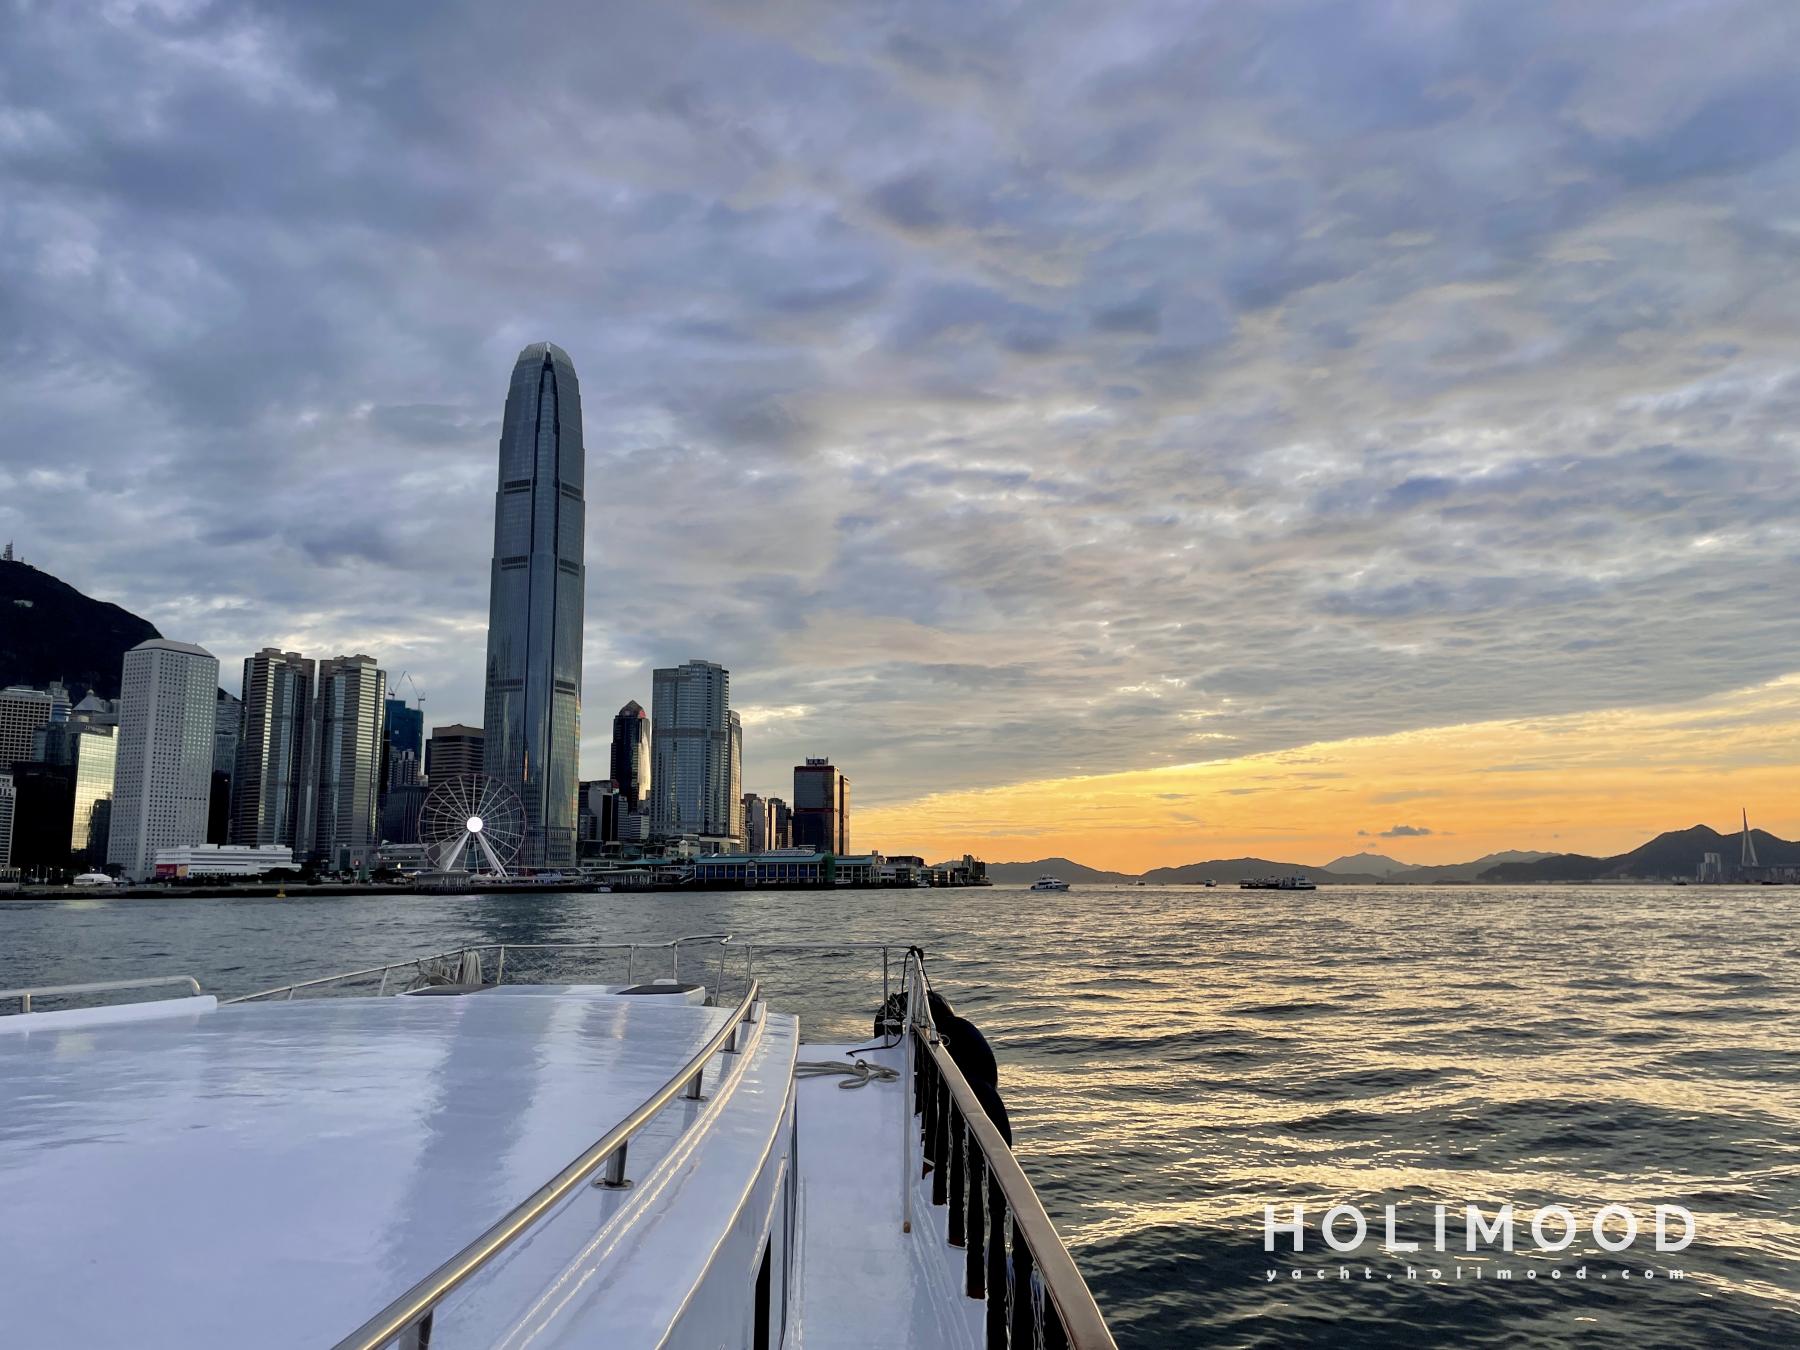 LT01 Pick up & drop off at Victoria Harbour , Spacious, from $428/ppl Boat Party All Inclusive Package (recommended for weekdays) 15